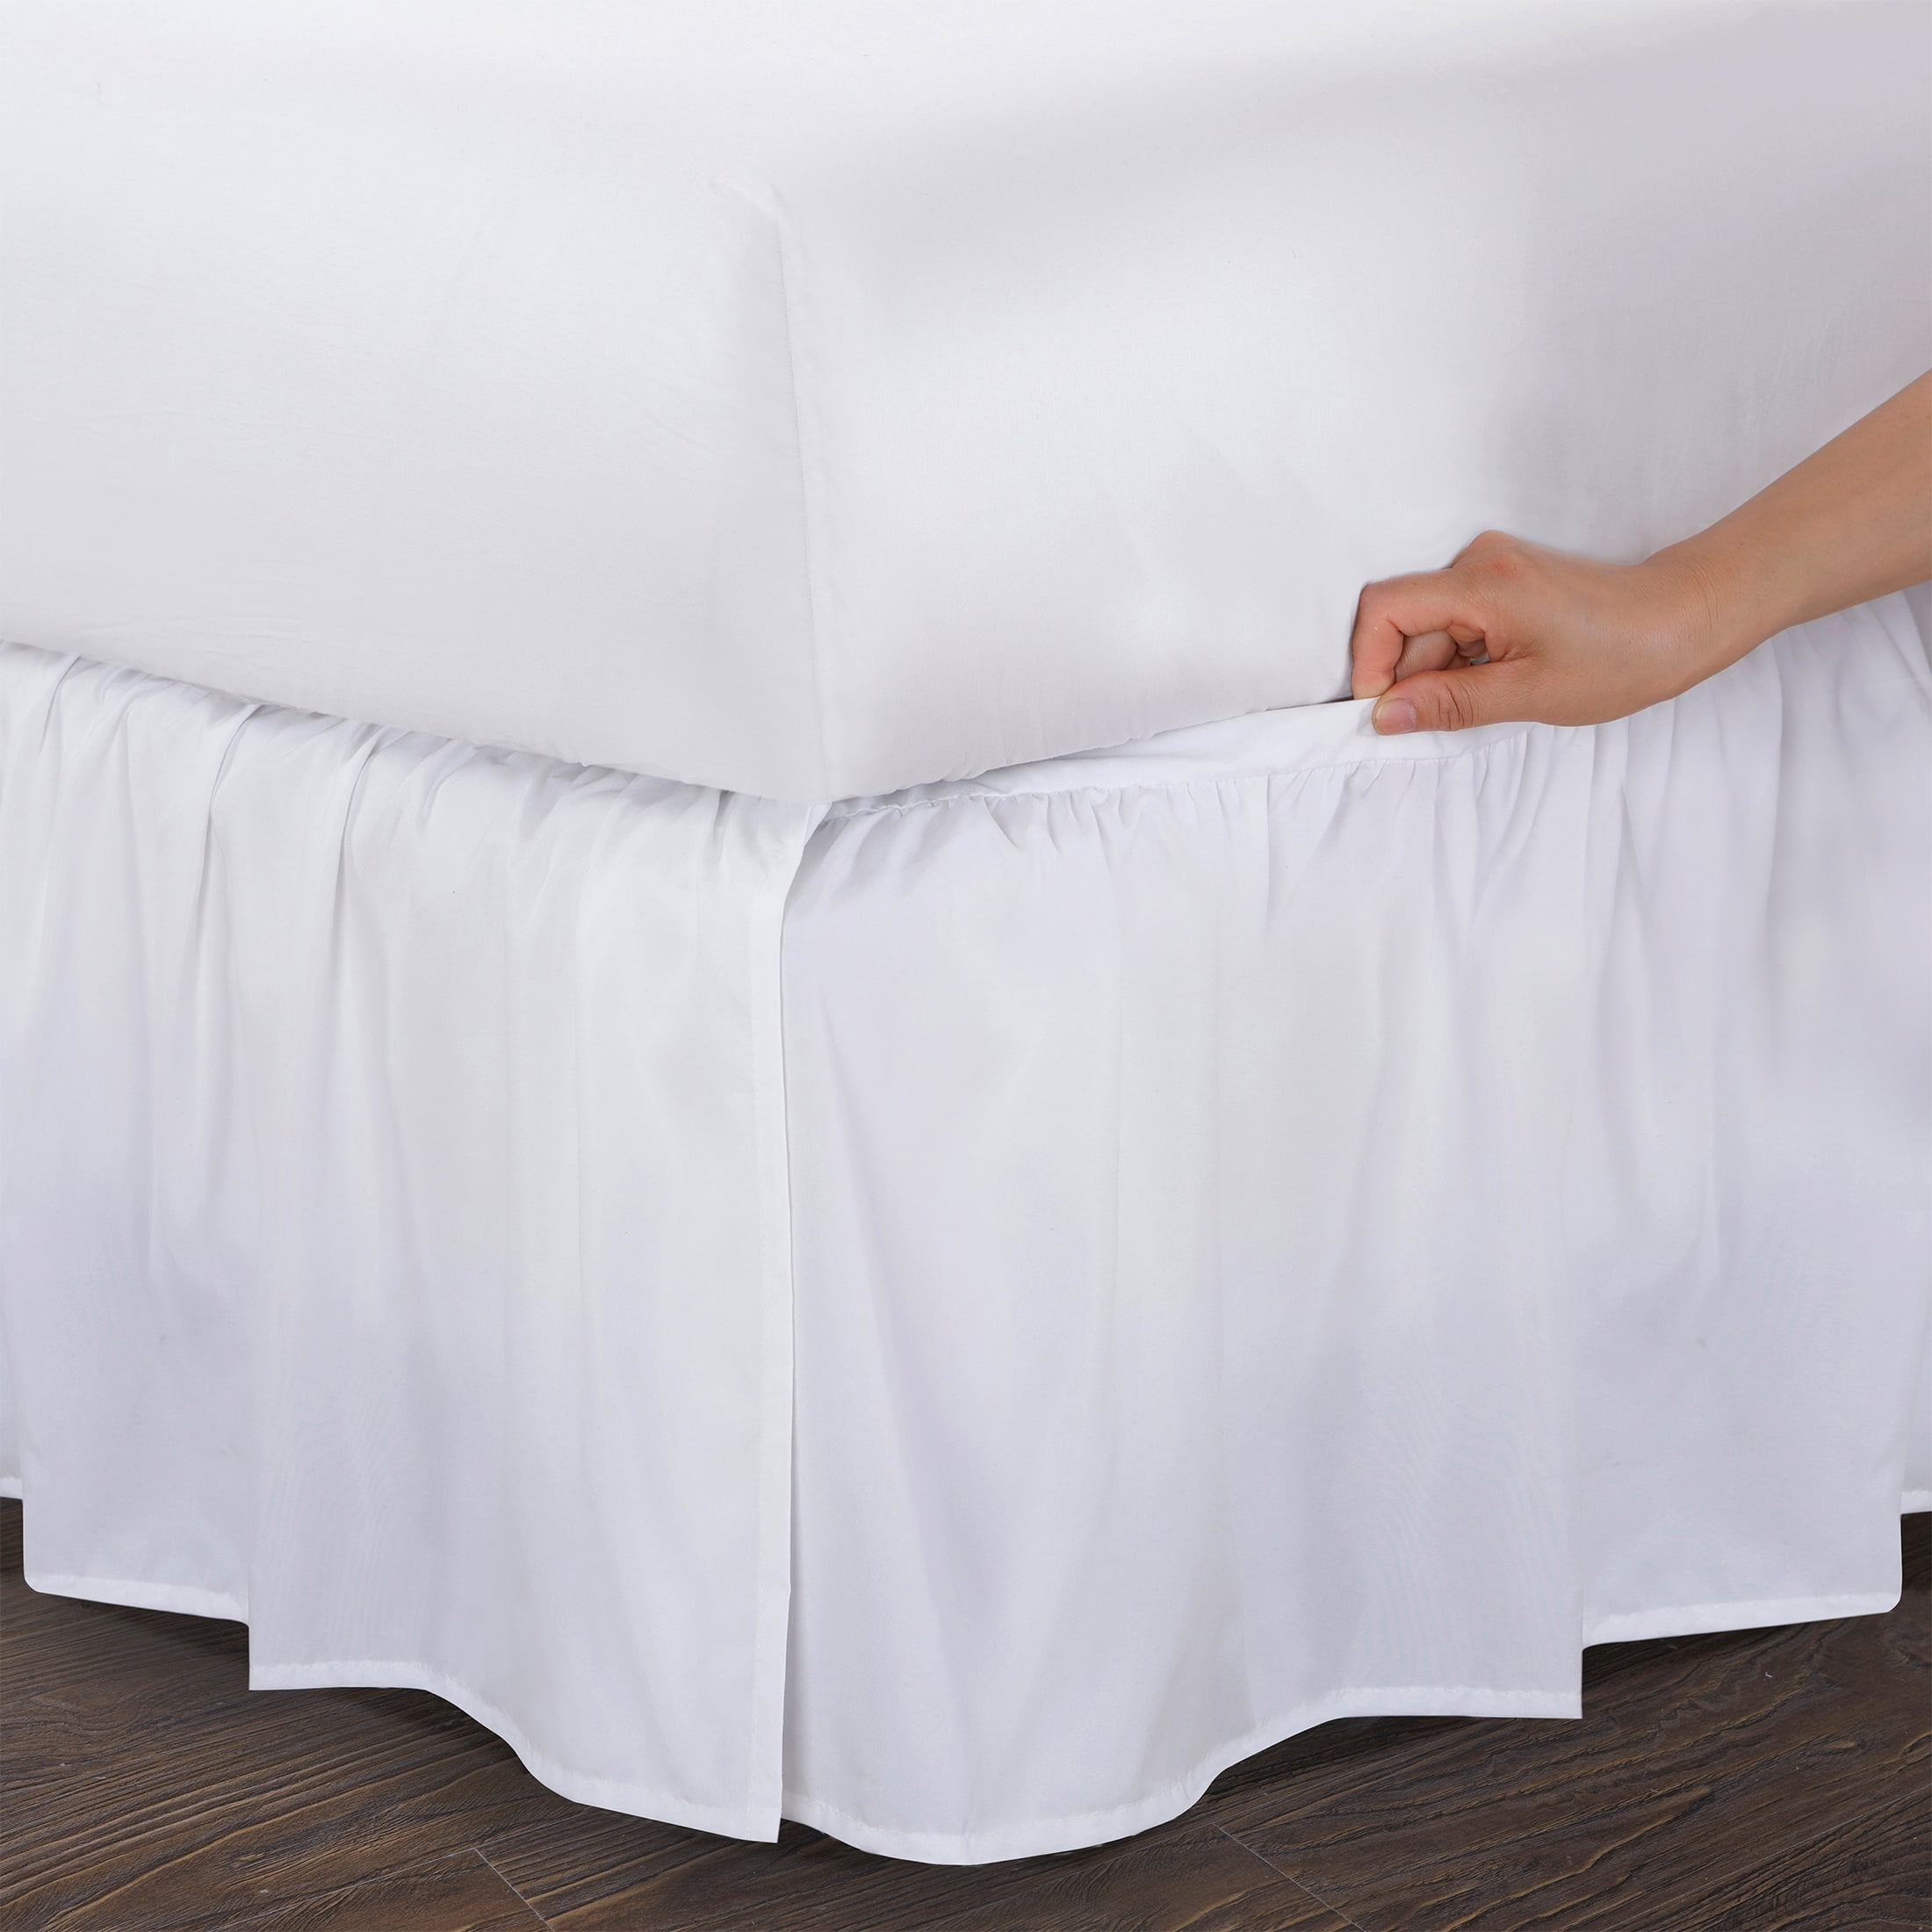 Details about   Wrap Around Bedskirt Elastic Wrap Around Easy On/Easy Off All Size/Color 14"Drop 